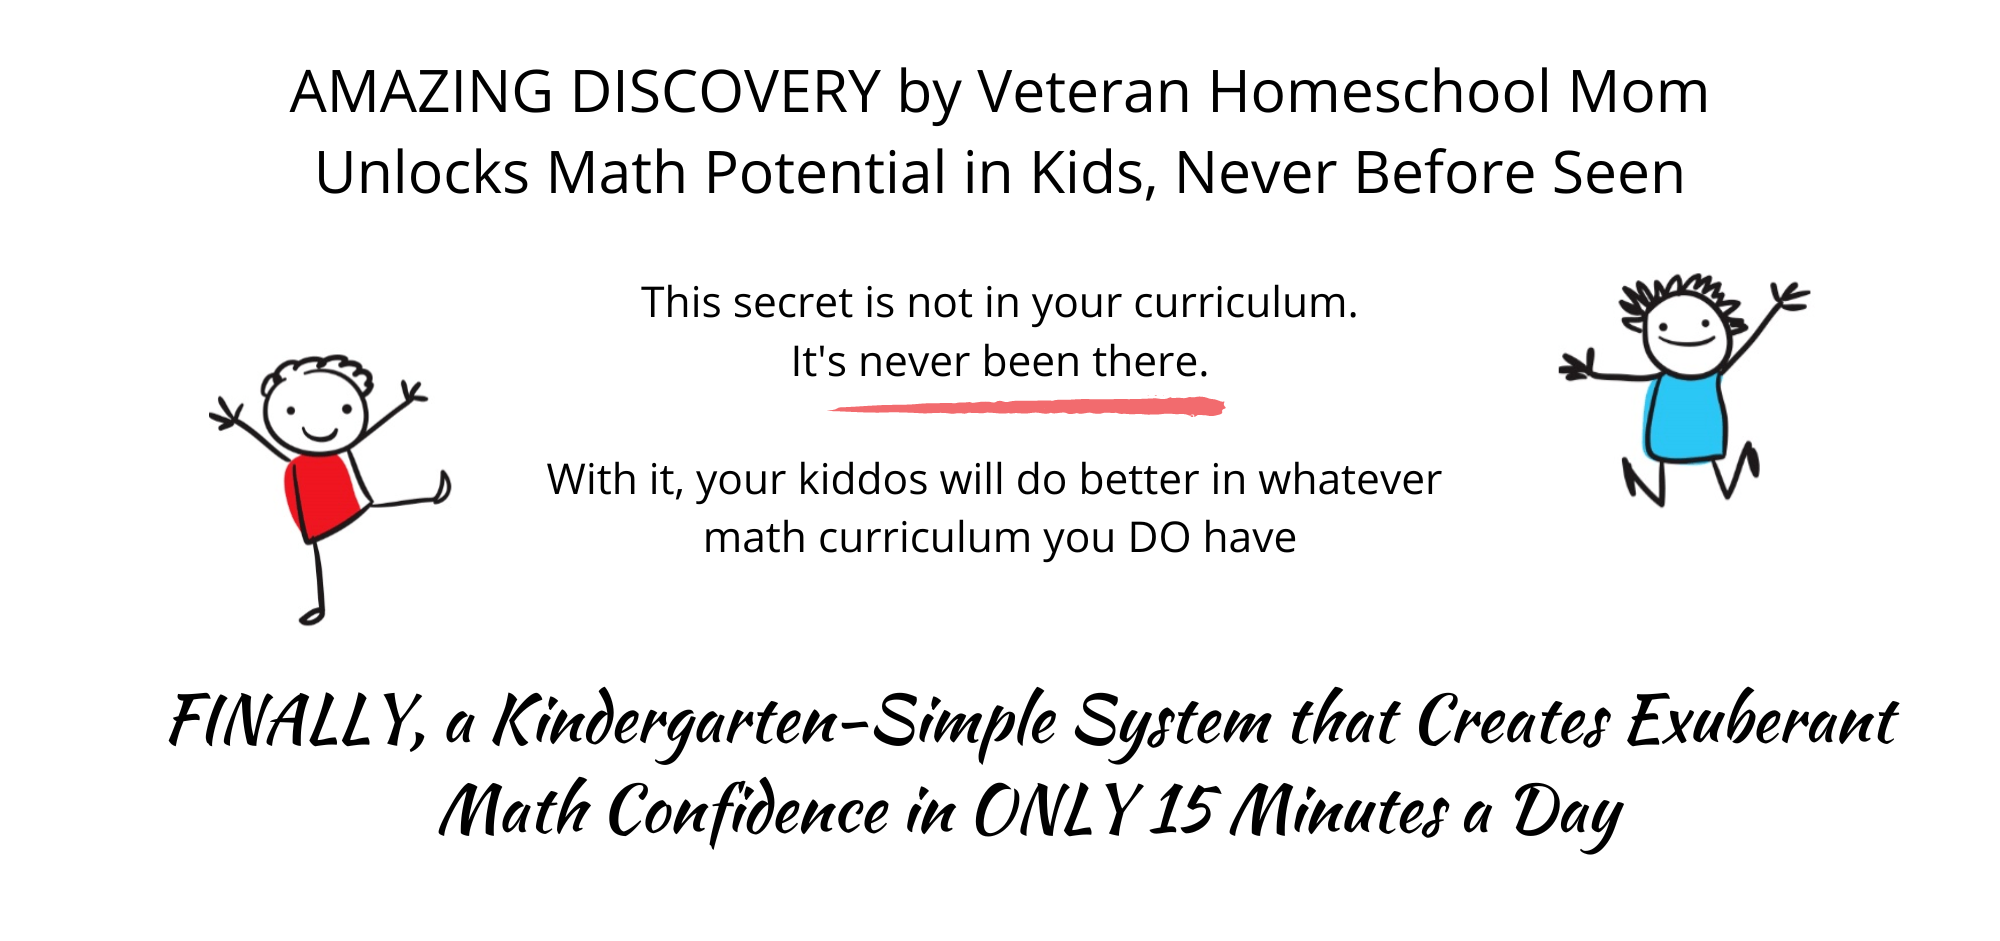 Amazing discovery by veteran homeschool mom unlocks math potential in kids, never before seen. The secret is not in your curriculum. It&#39;s never been there. With it your kiddos will do better in whatever math curriculum you DO have. Kindergarten-simple creates exuberant math confidence in only 15 minutes a day